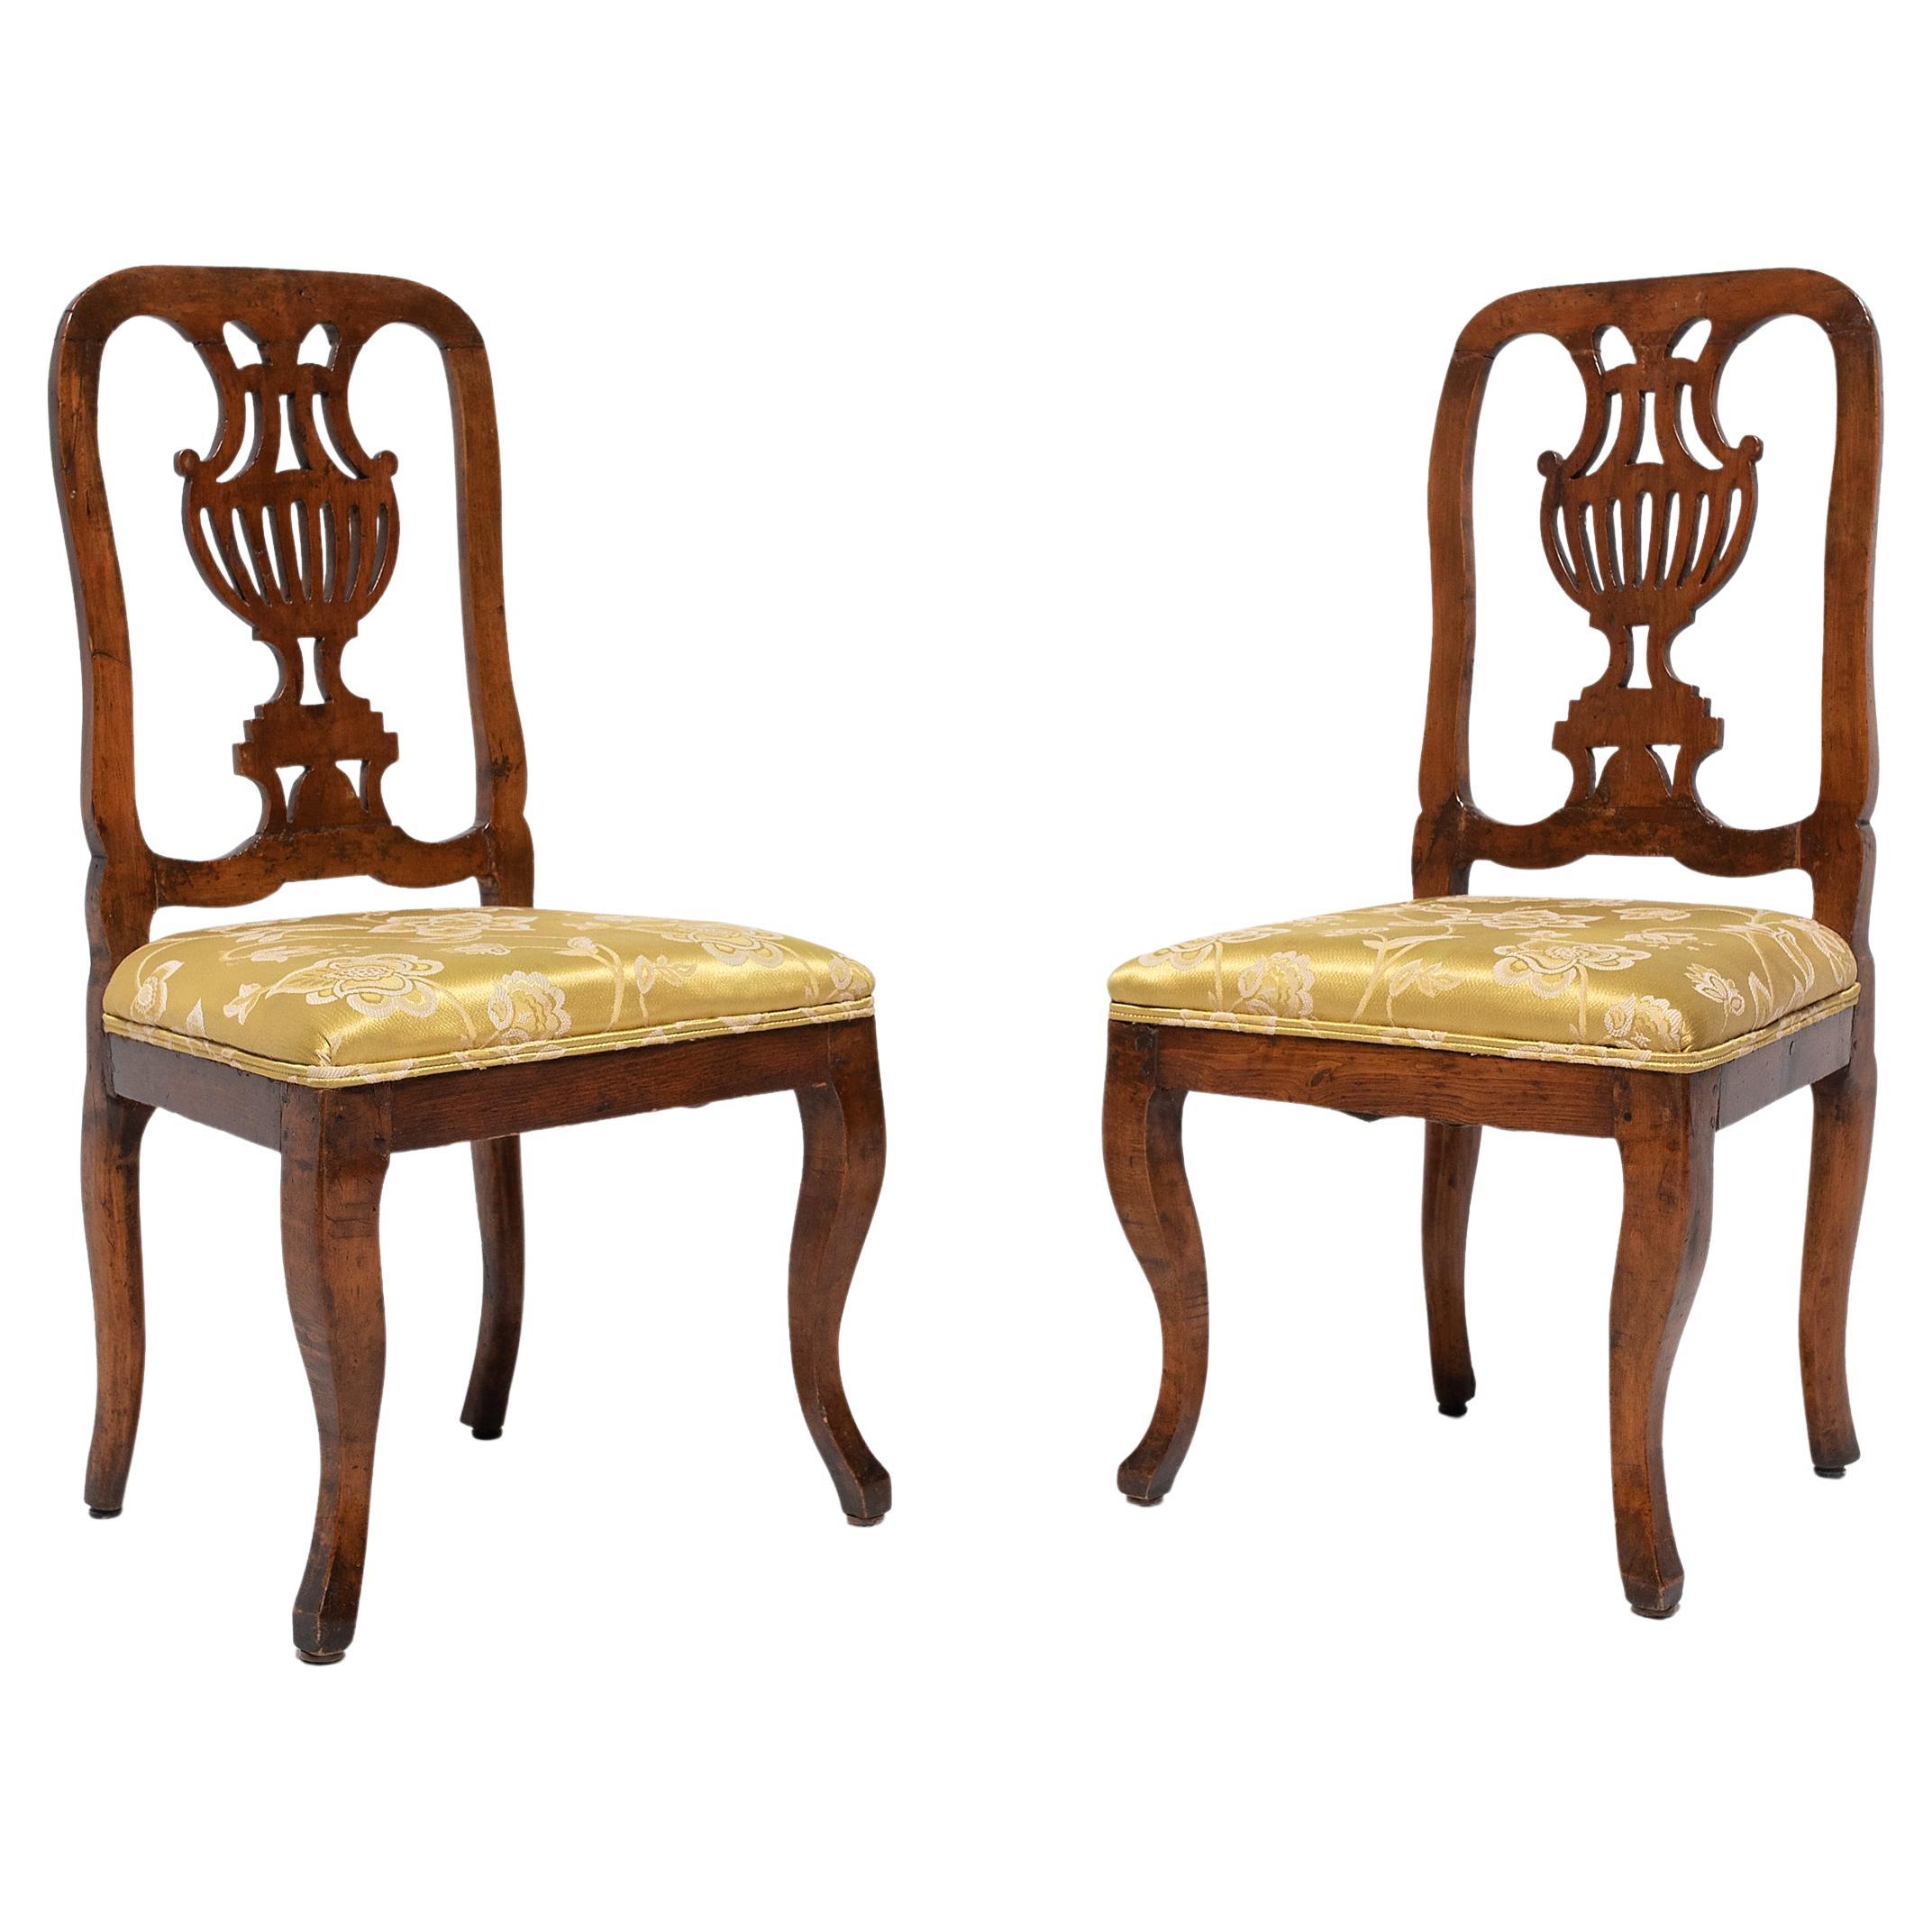 Pair of Chippendale Style European Dining Chairs, circa 1800 For Sale